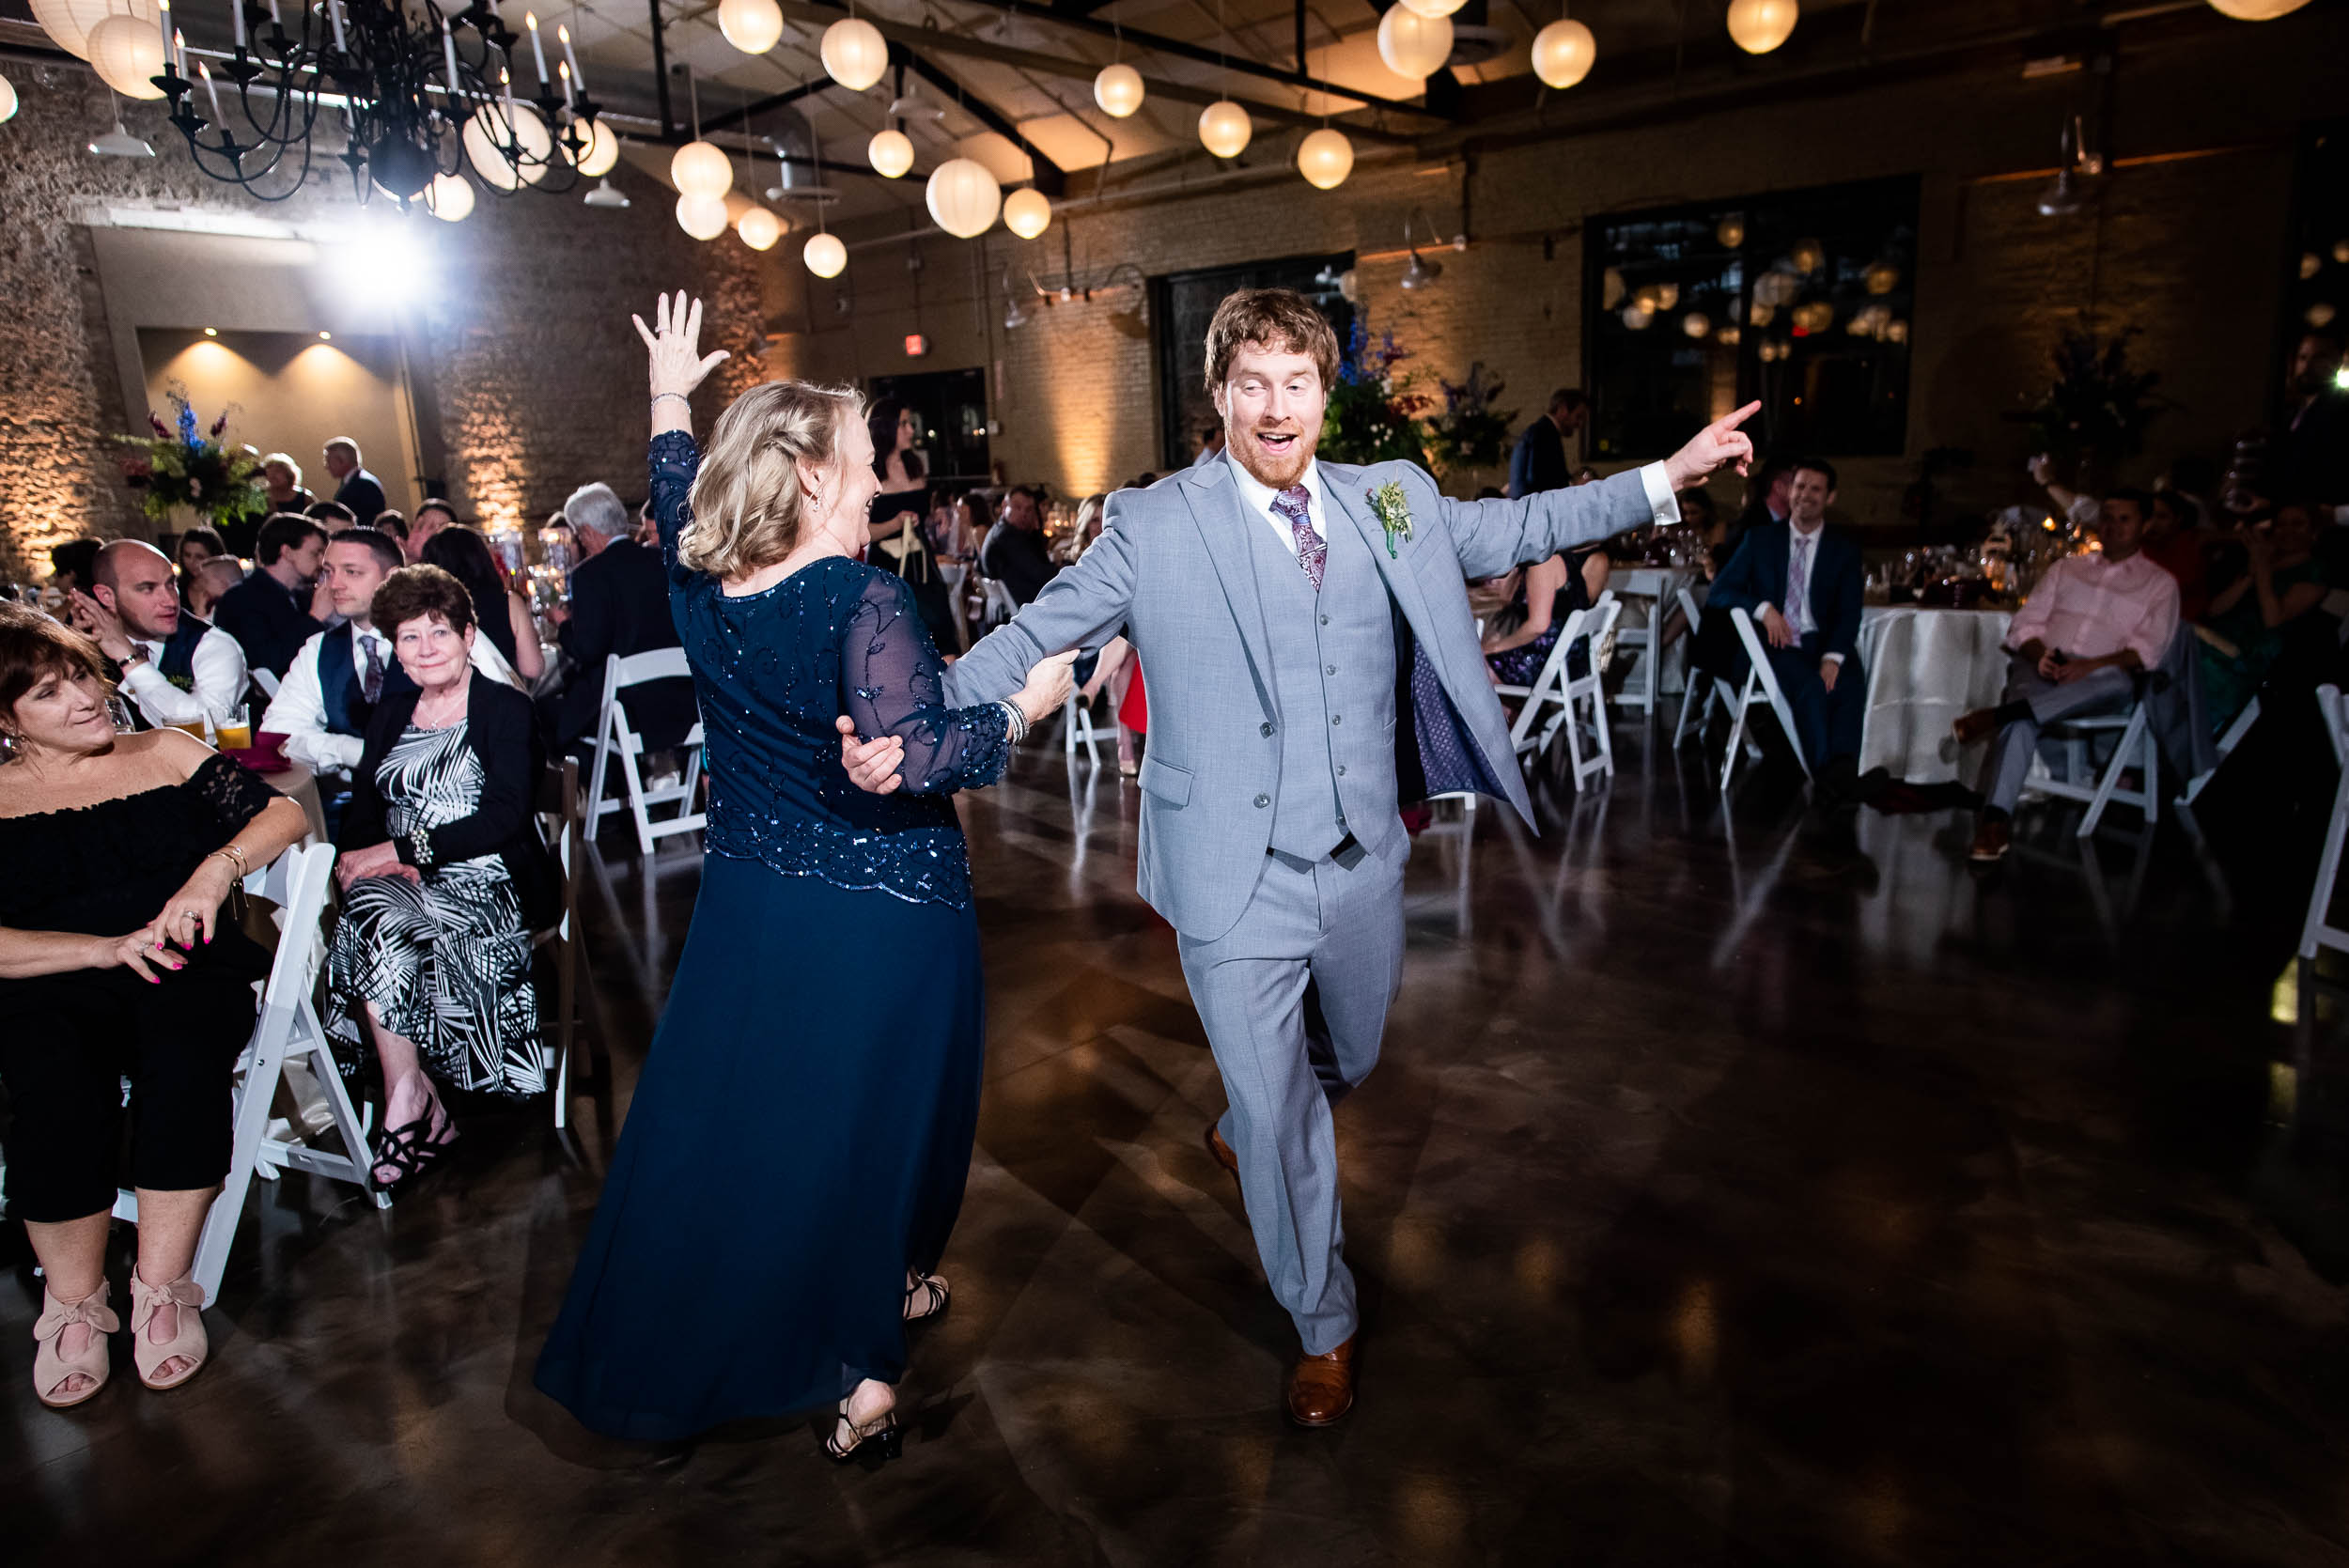 Mother/son dance: Modern industrial Chicago wedding inside Prairie Street Brewhouse captured by J. Brown Photography. Find more wedding ideas at jbrownphotography.com!